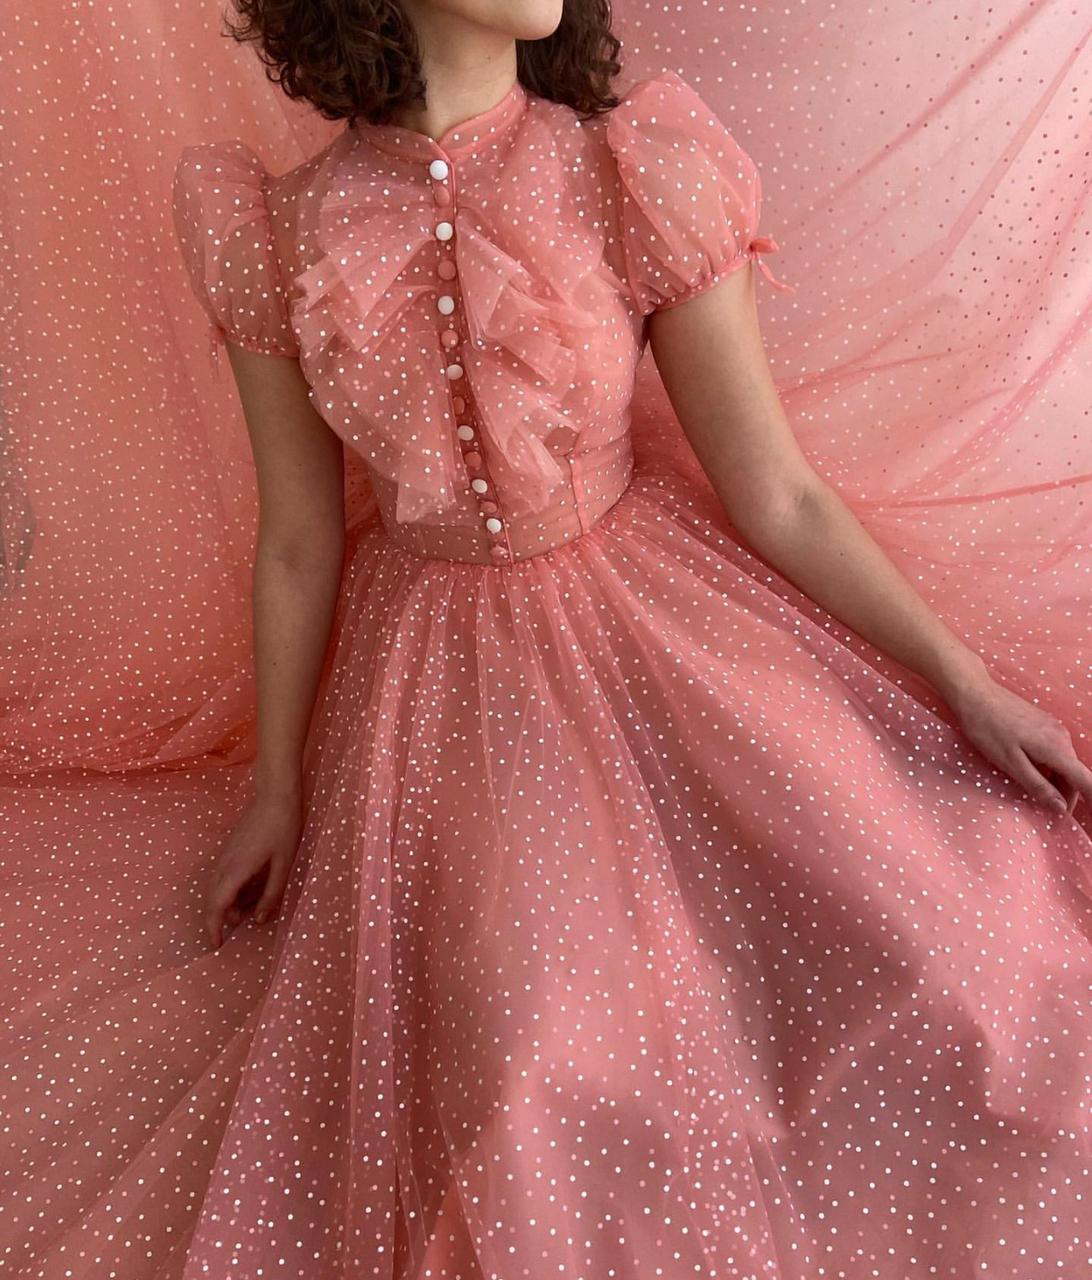 Pink A-Line dress with short cap sleeves and dotted fabric